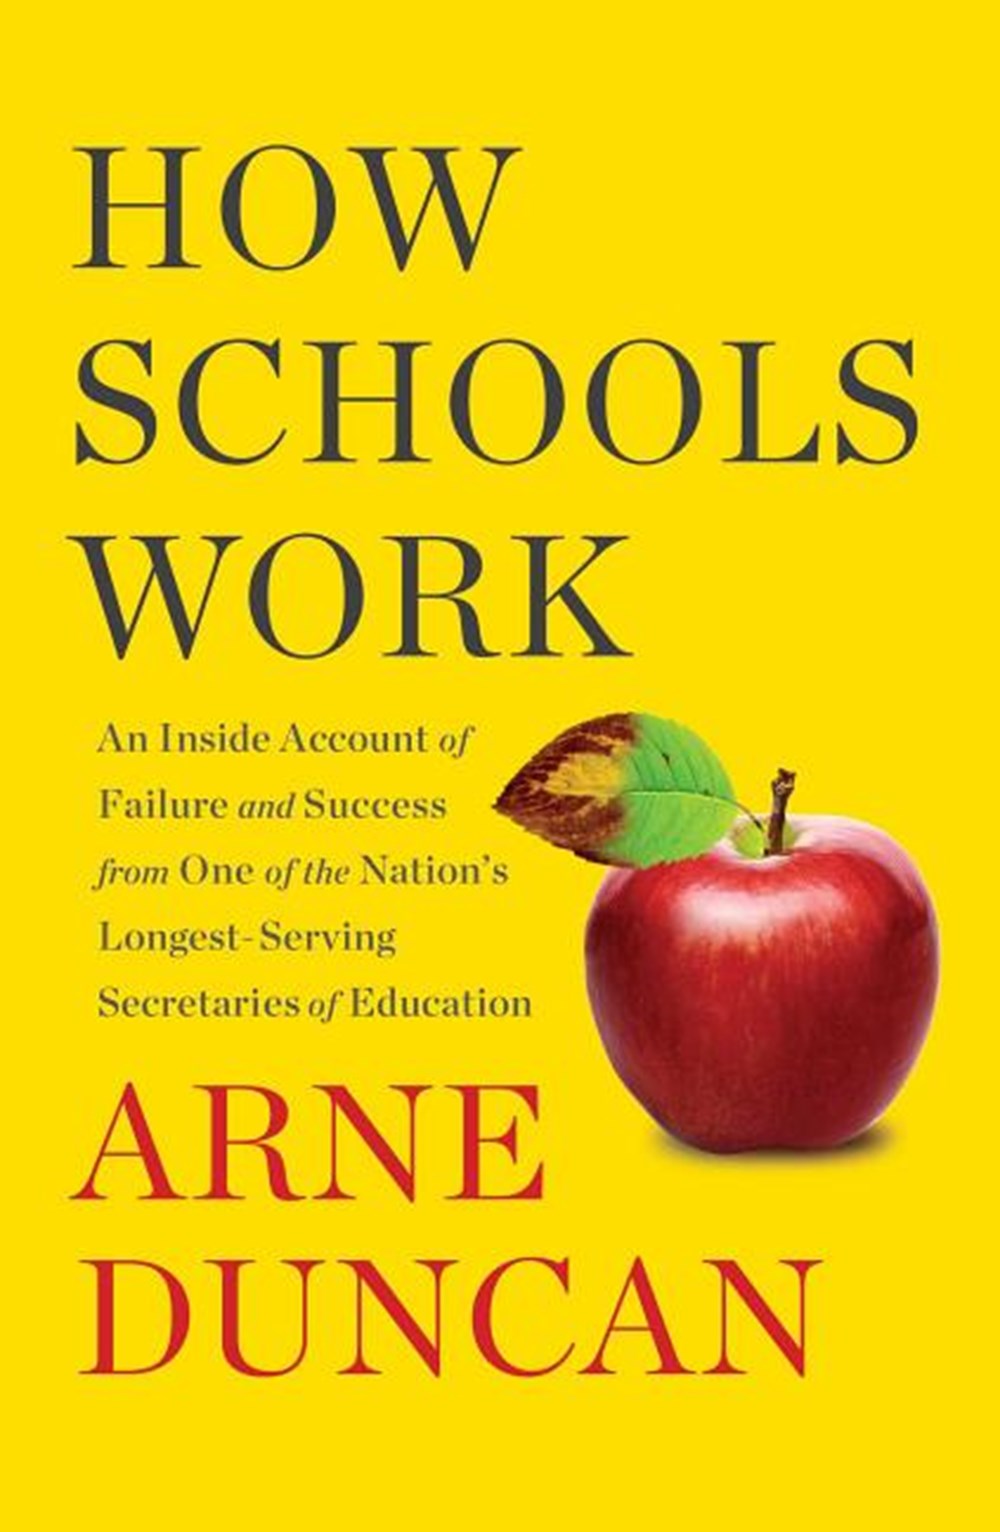 How Schools Work An Inside Account of Failure and Success from One of the Nation's Longest-Serving S